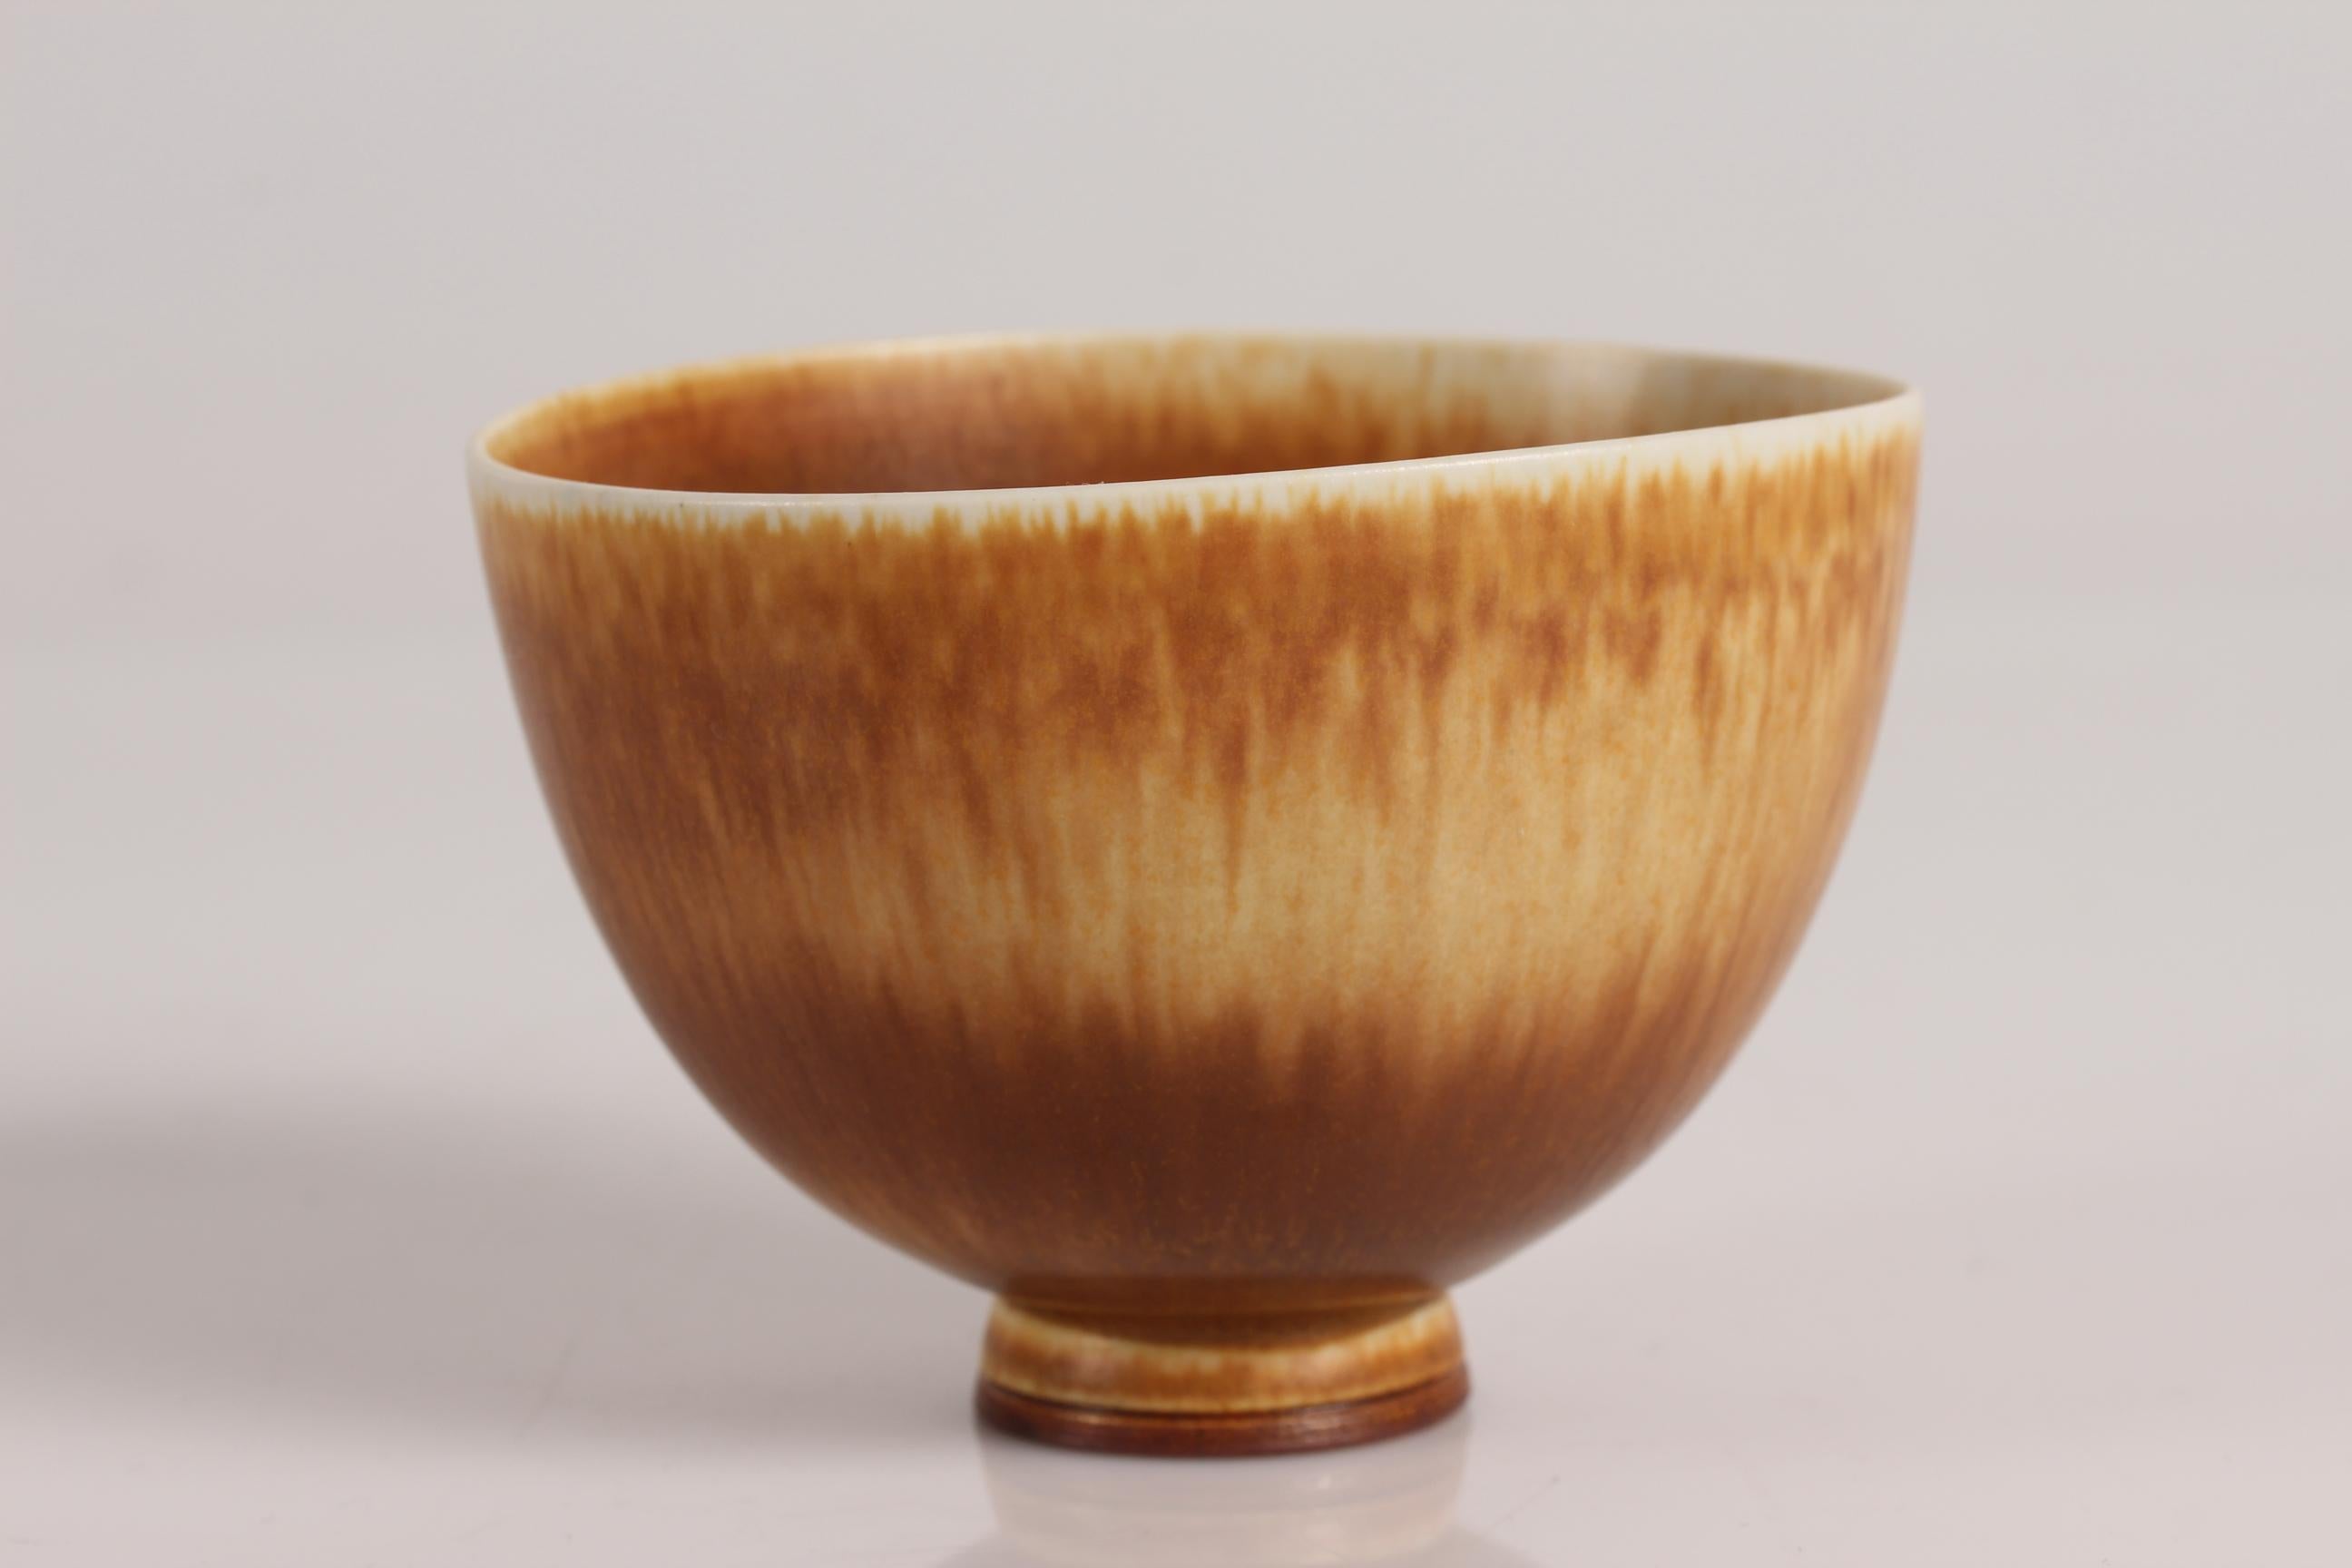 Small ceramic bowl on low foot by the Swedish ceramist Berndt Friberg (1899-1981)
The bowl, which is not quite circular, is decorated with ocher colored glaze and signed Friberg studiohand.

Measures: Height 6.9 cm
Length 9.8 cm
Width 9